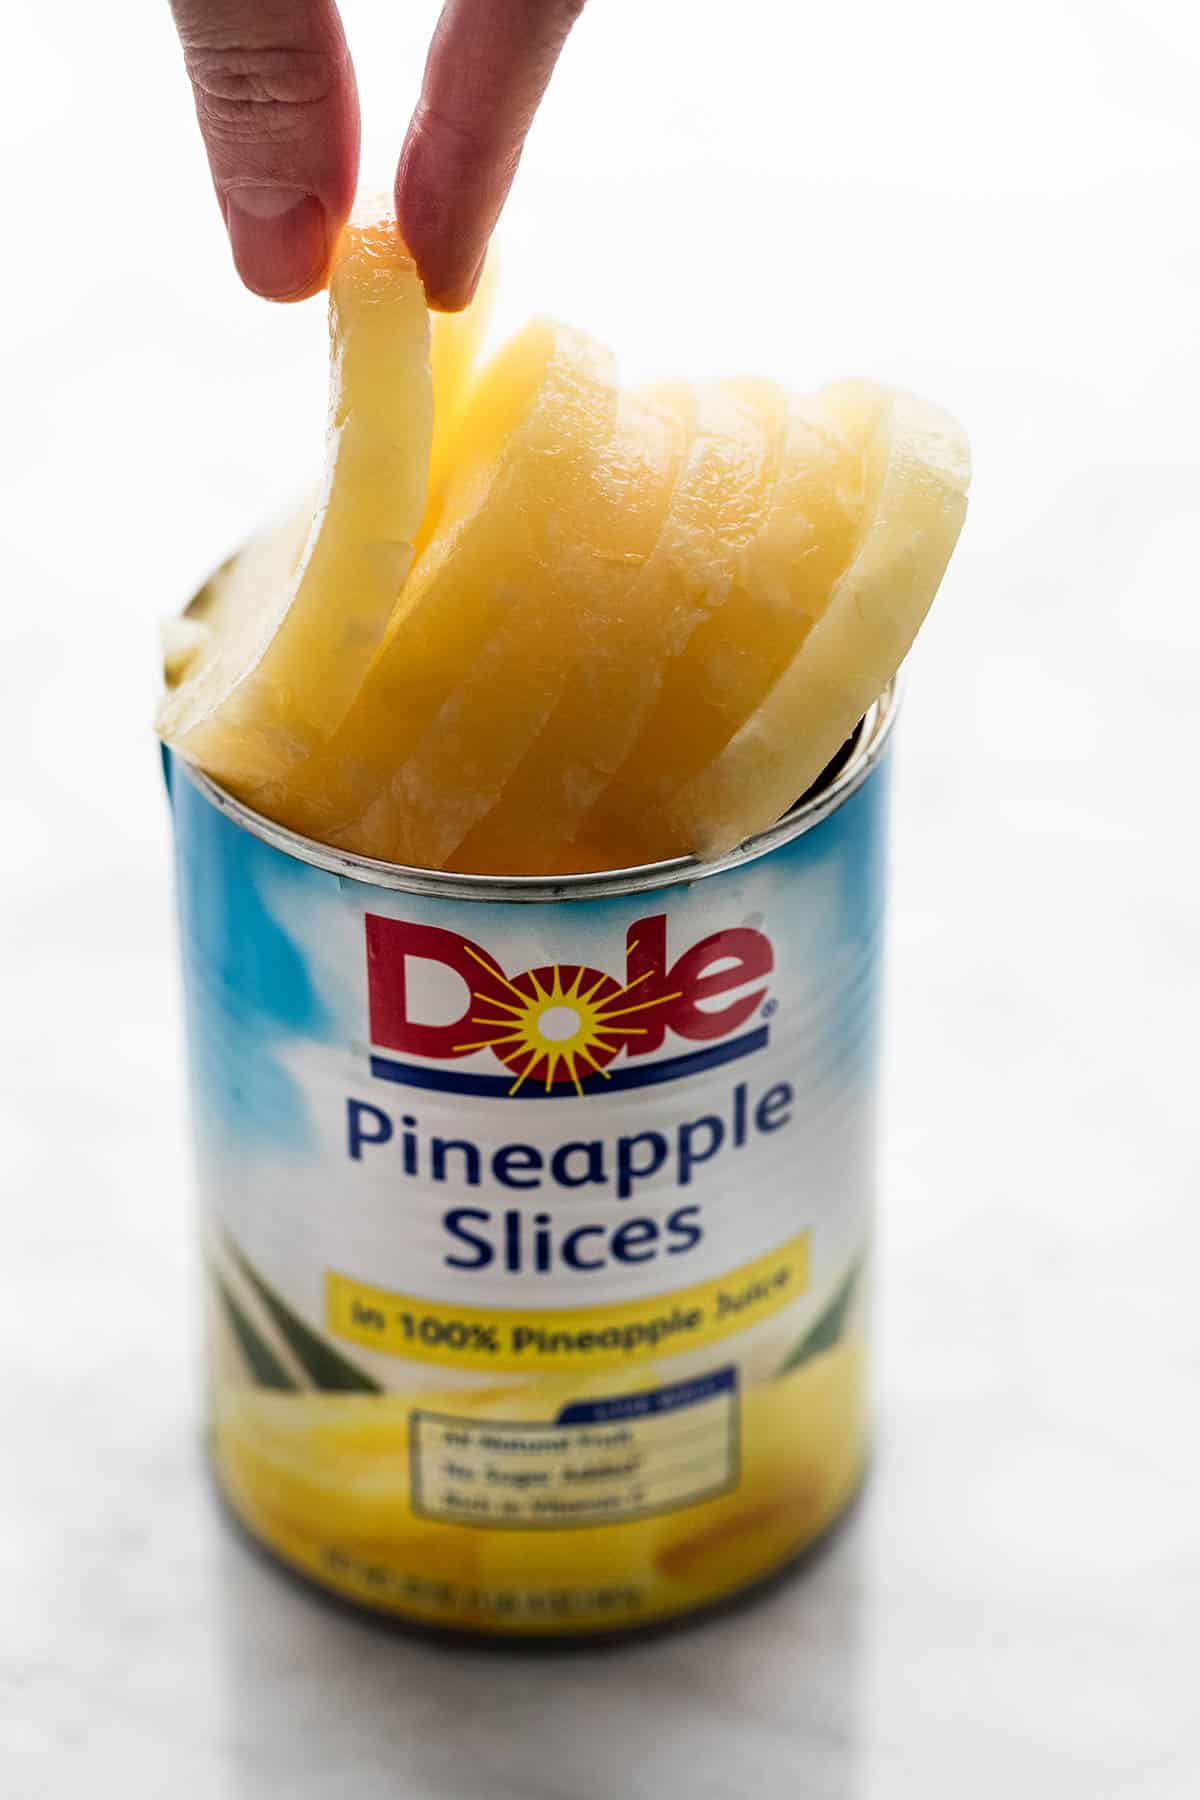 a hand grabbing a pineapple slice from a can of Dole pineapple slices.